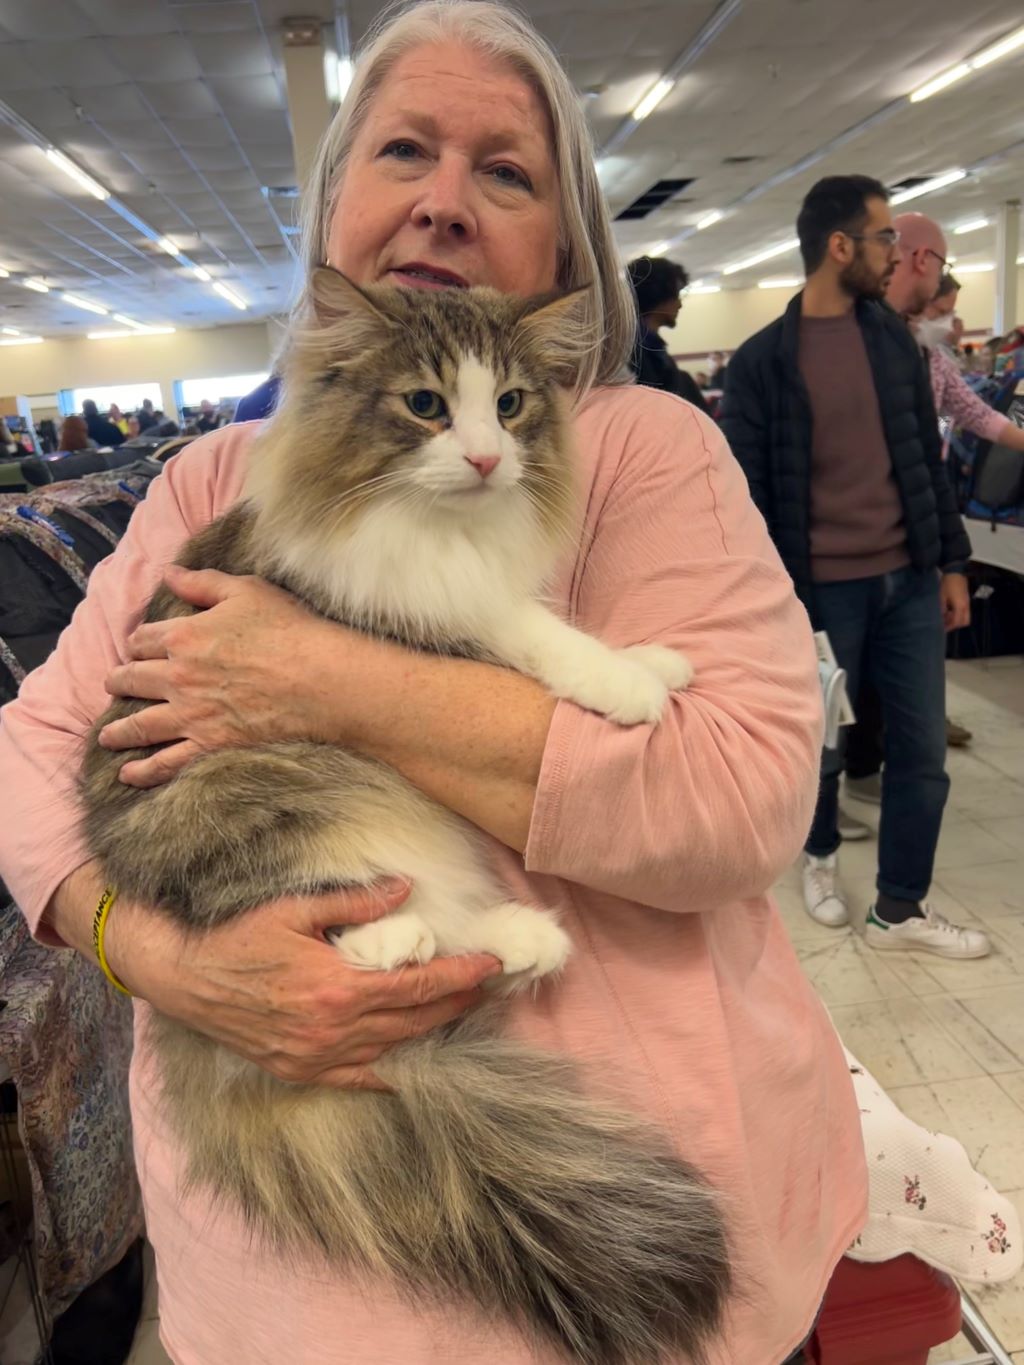 A woman with gray hair and a pink shirt is holding a large fluffy white and brown cat.